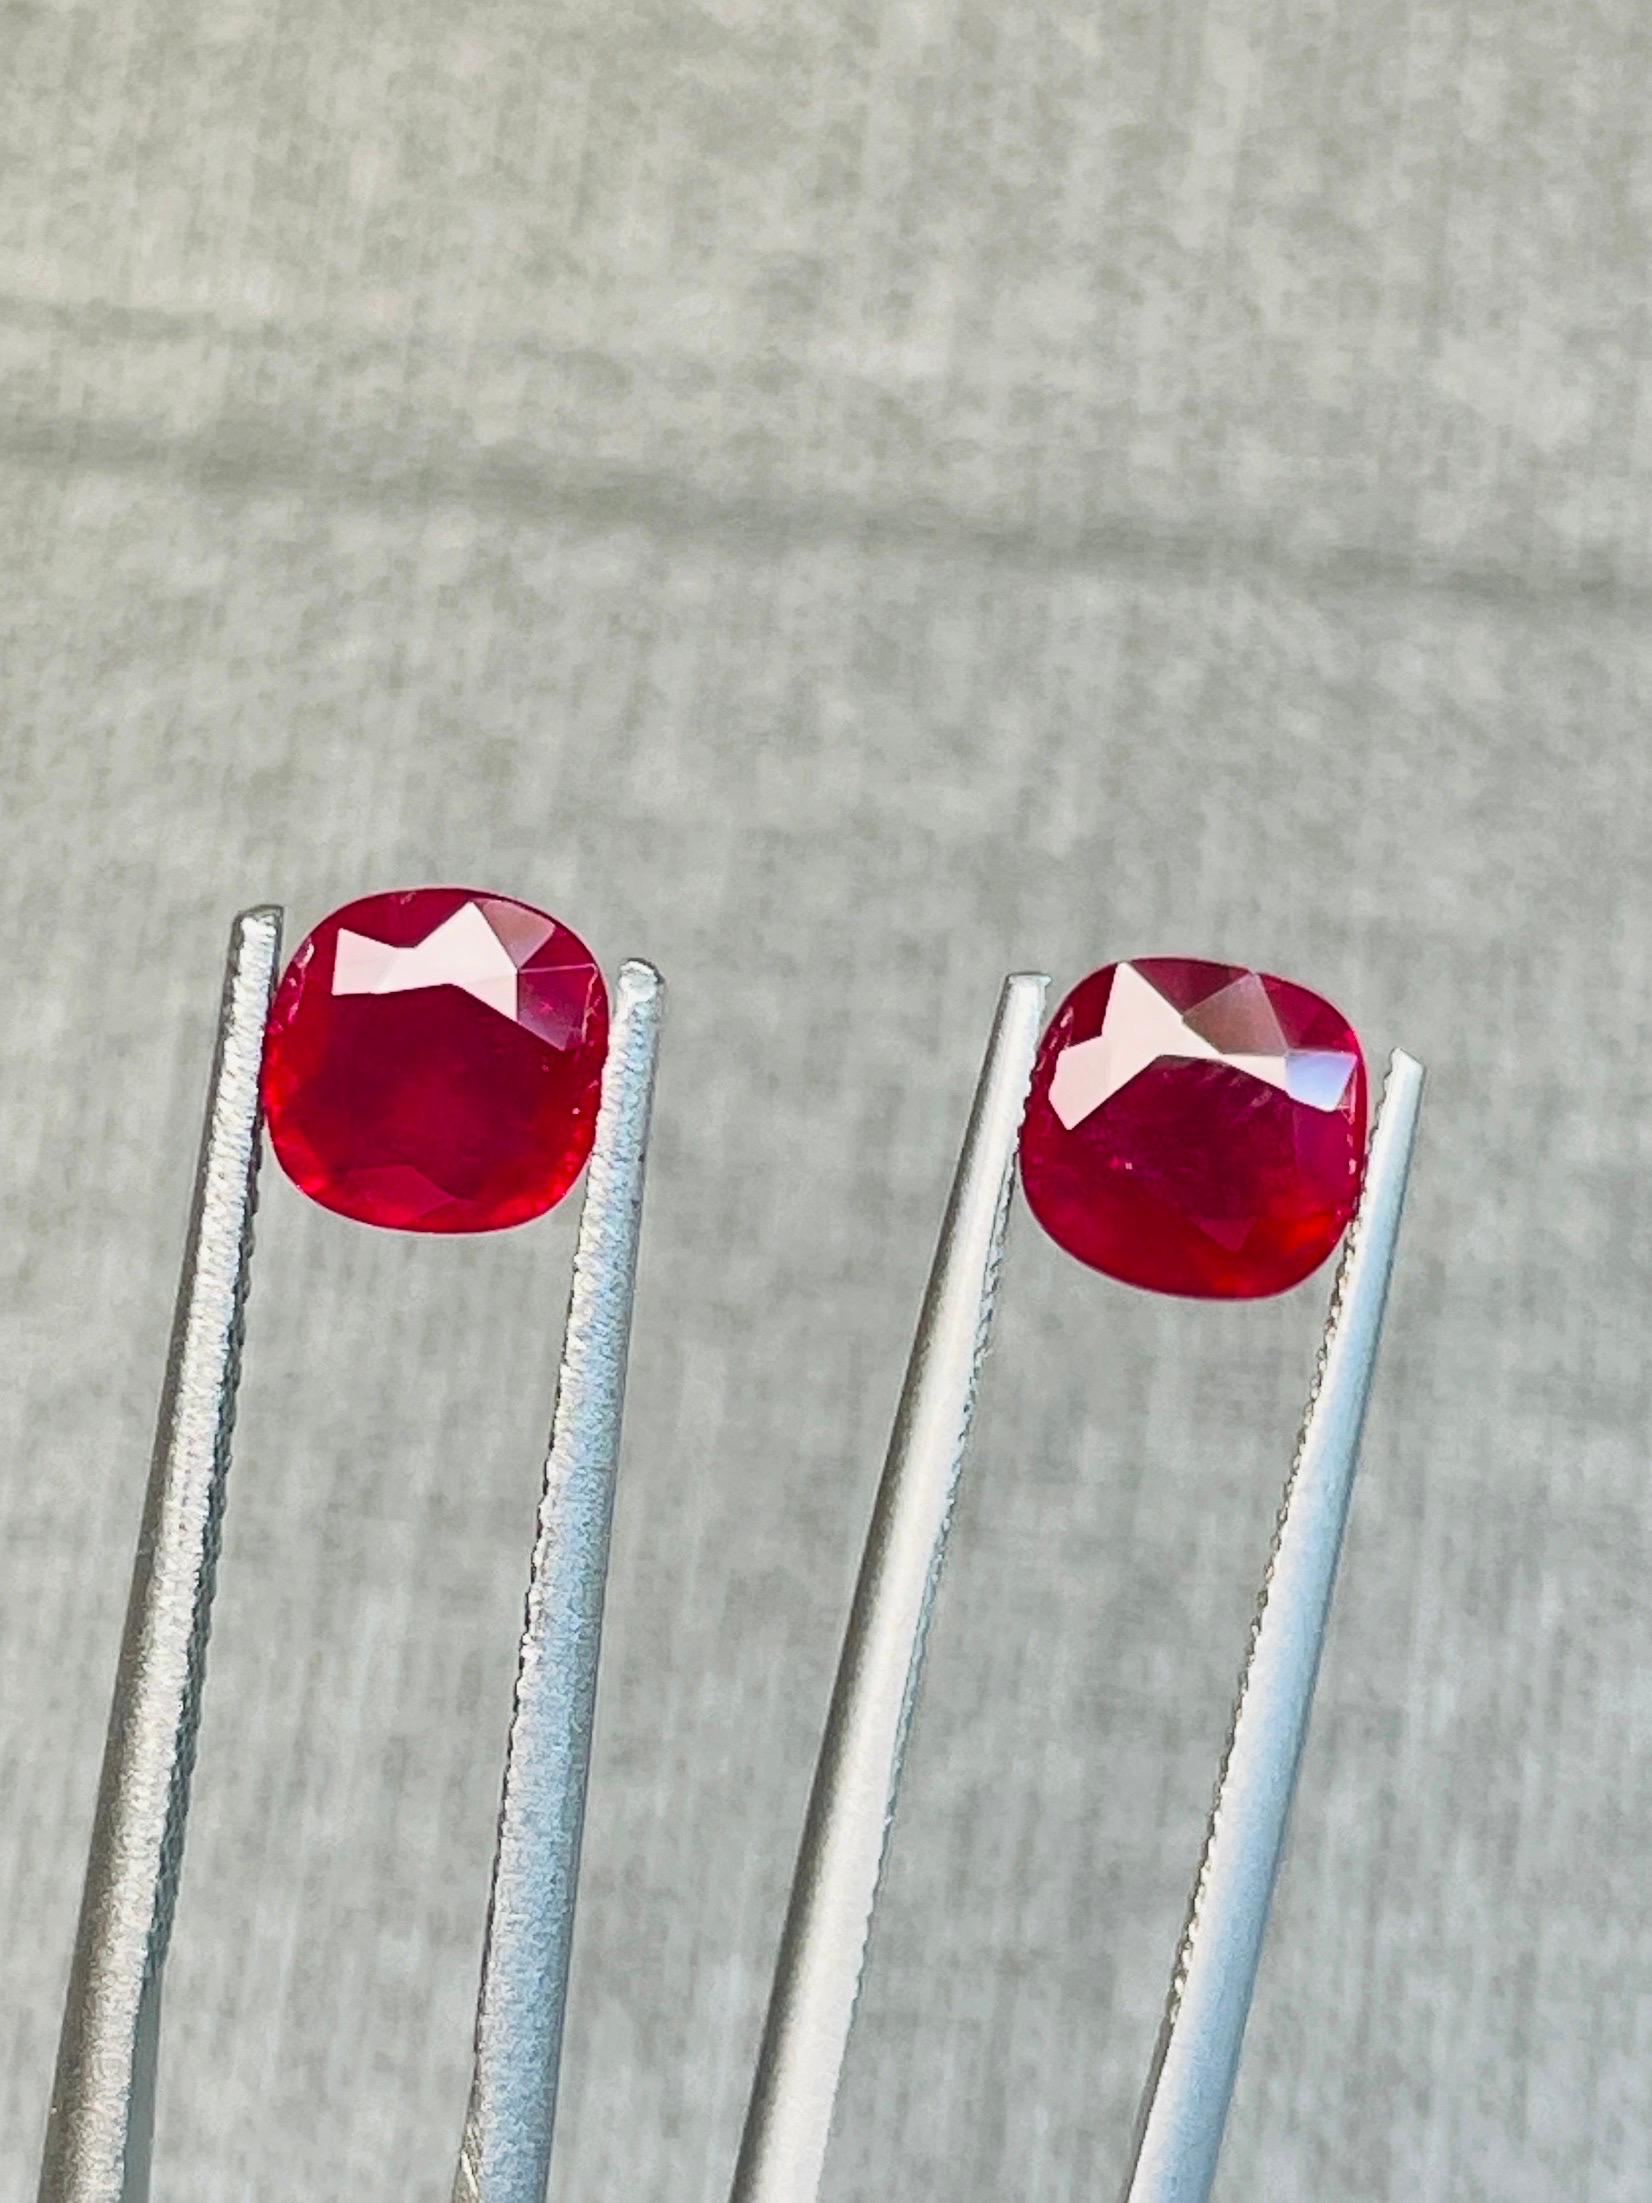 Rare pair 2.06ct burma ruby unheated pigeon blood color GIA AIGS certificate  For Sale 1